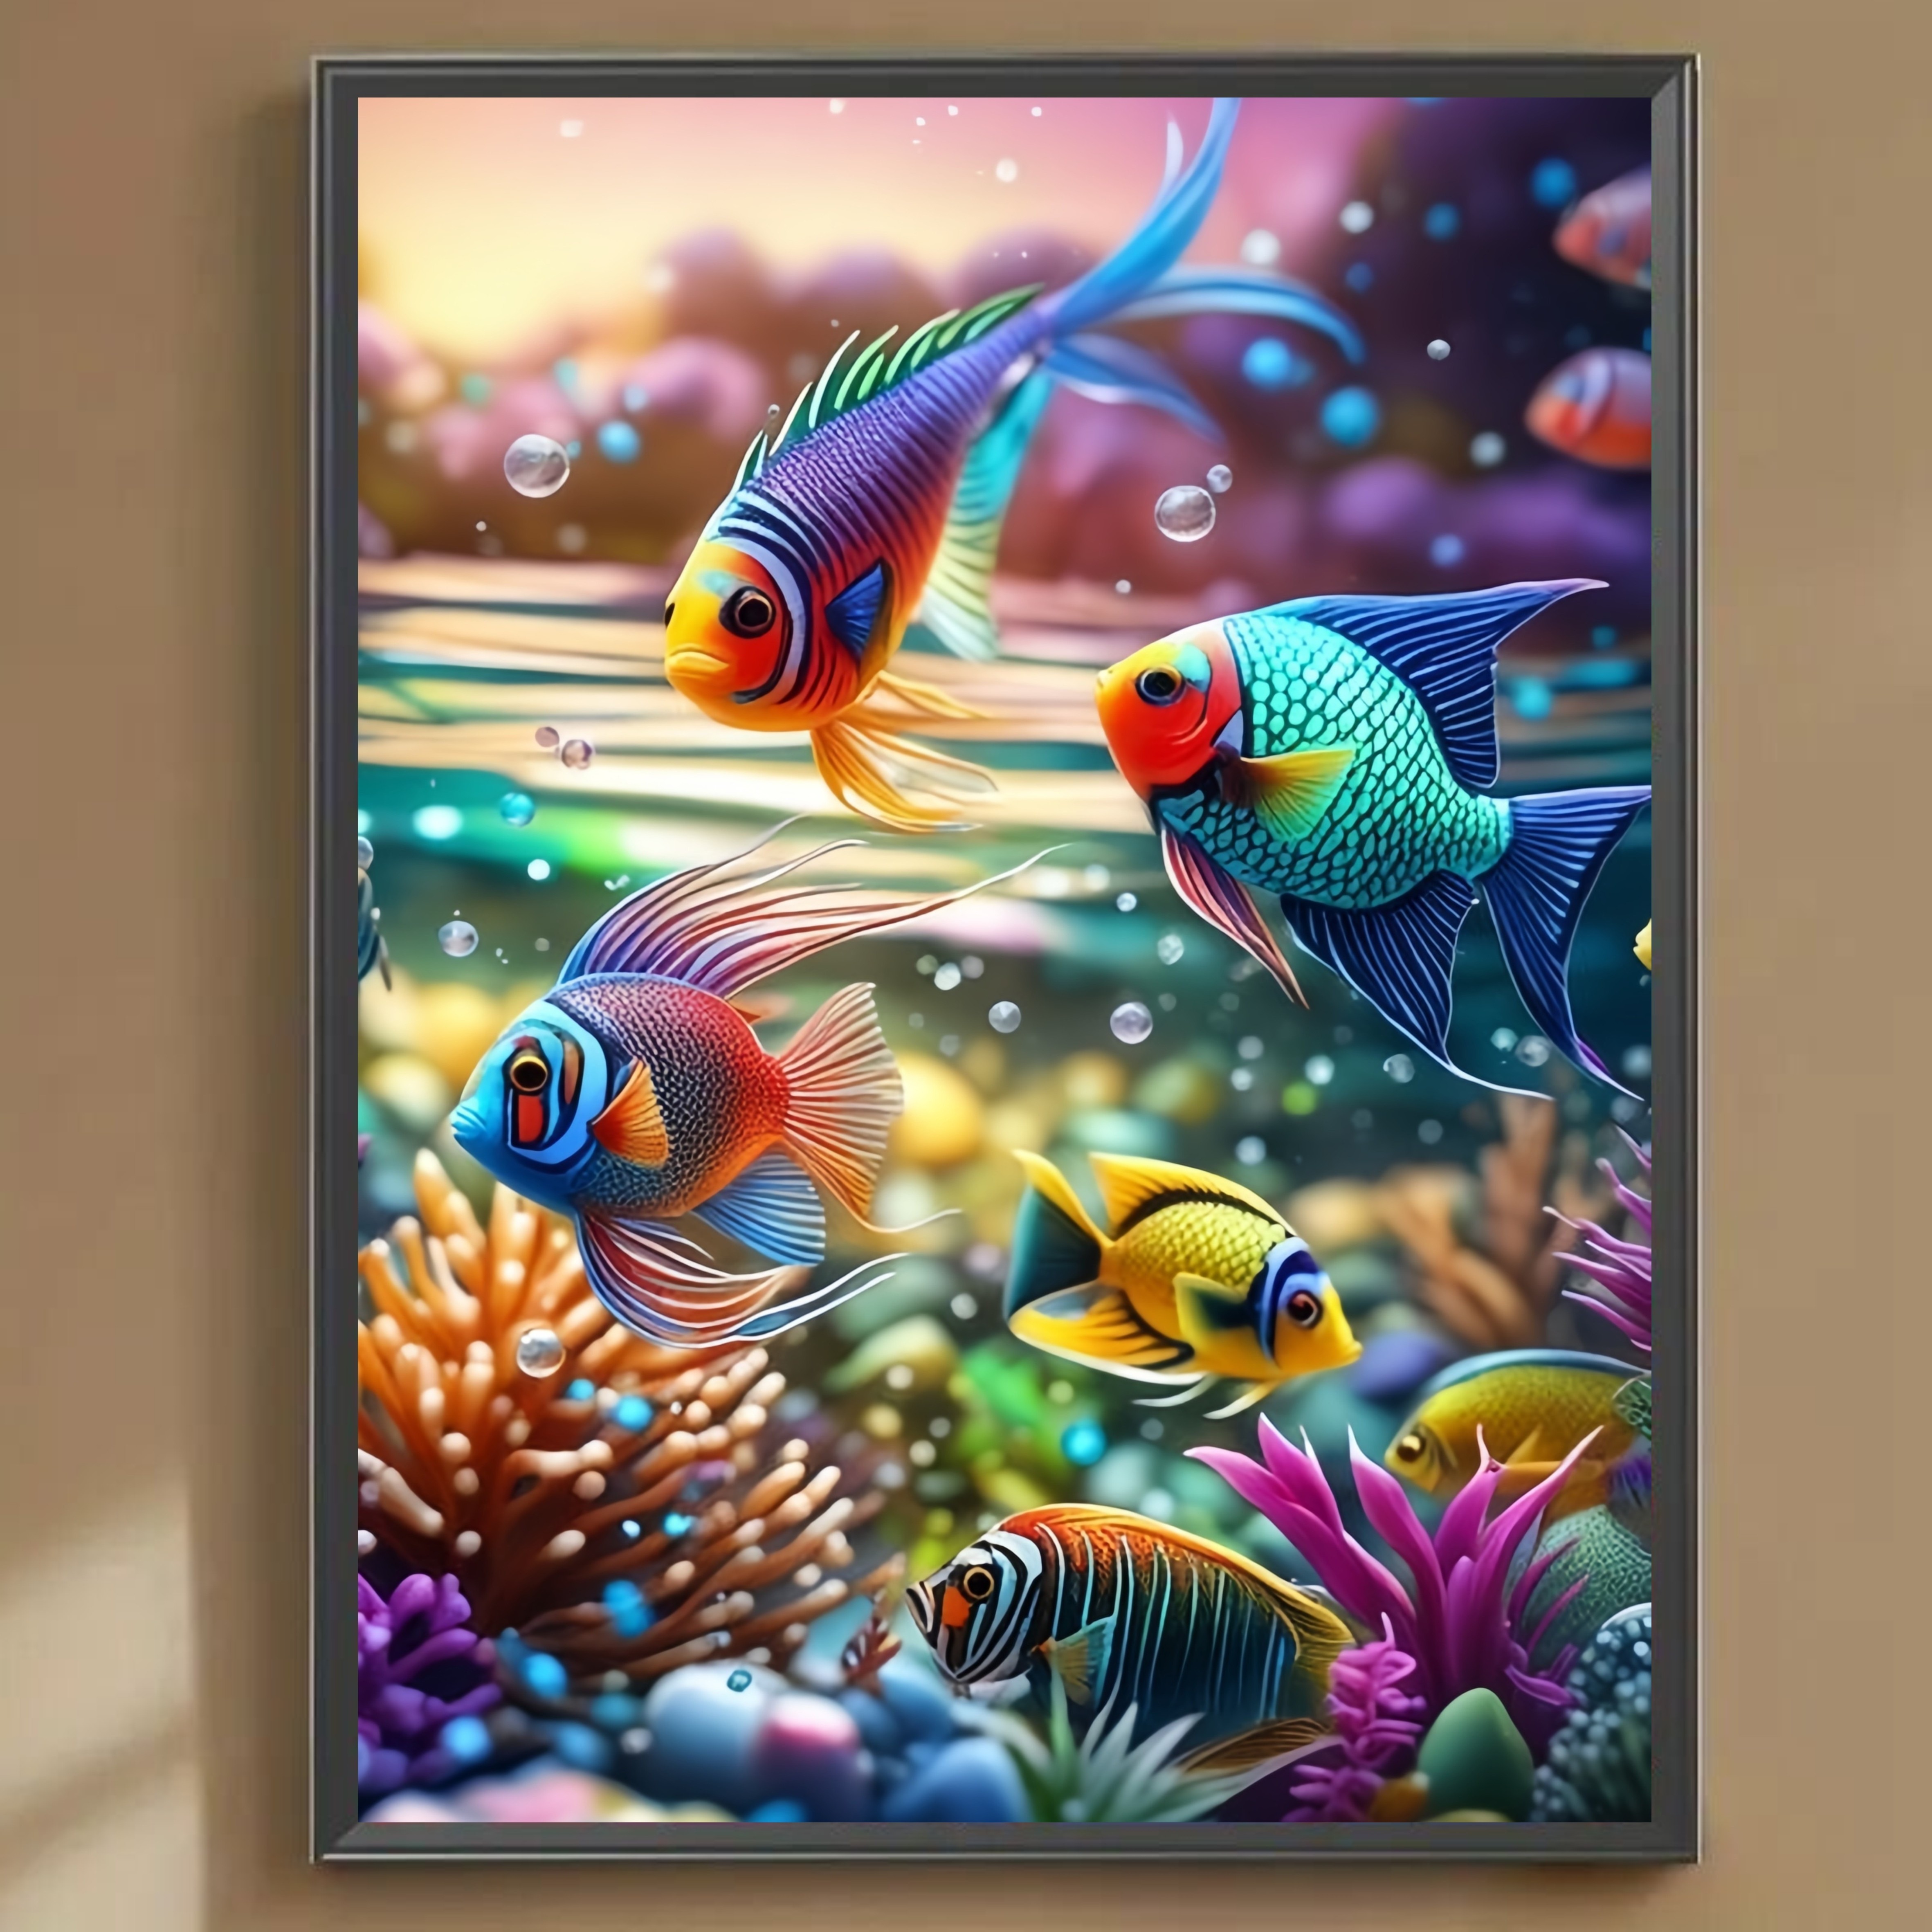 

5d Art Kit For Adults Beginners, Colorful Fish Full Circle Diamond Art Painting Kit For Home Furnishings Wall Decoration 11.81x15.7in